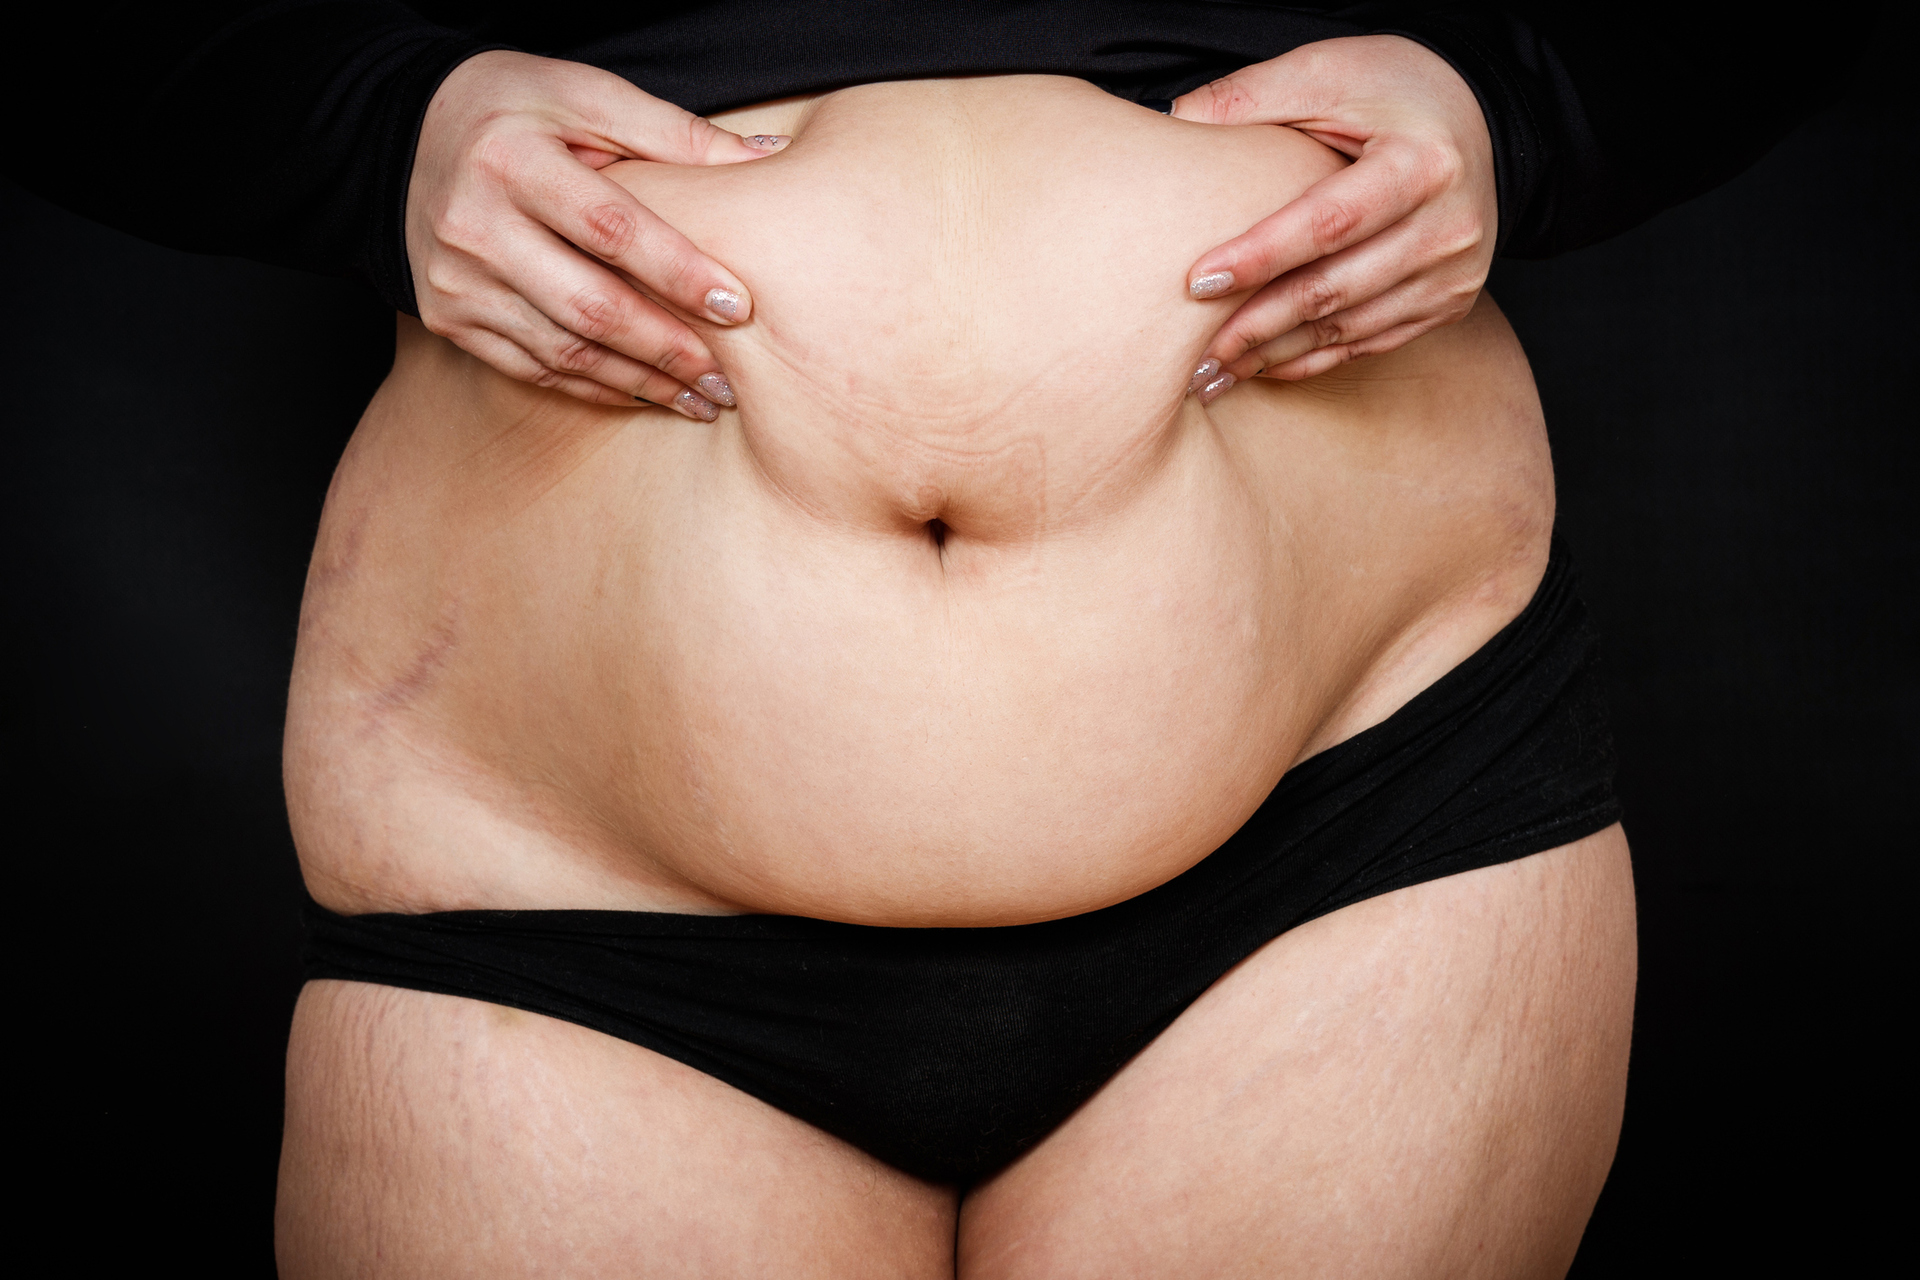 Tummy Tuck Before and After Photos NZ - Dr Mark Gittos Plastic Surgeon